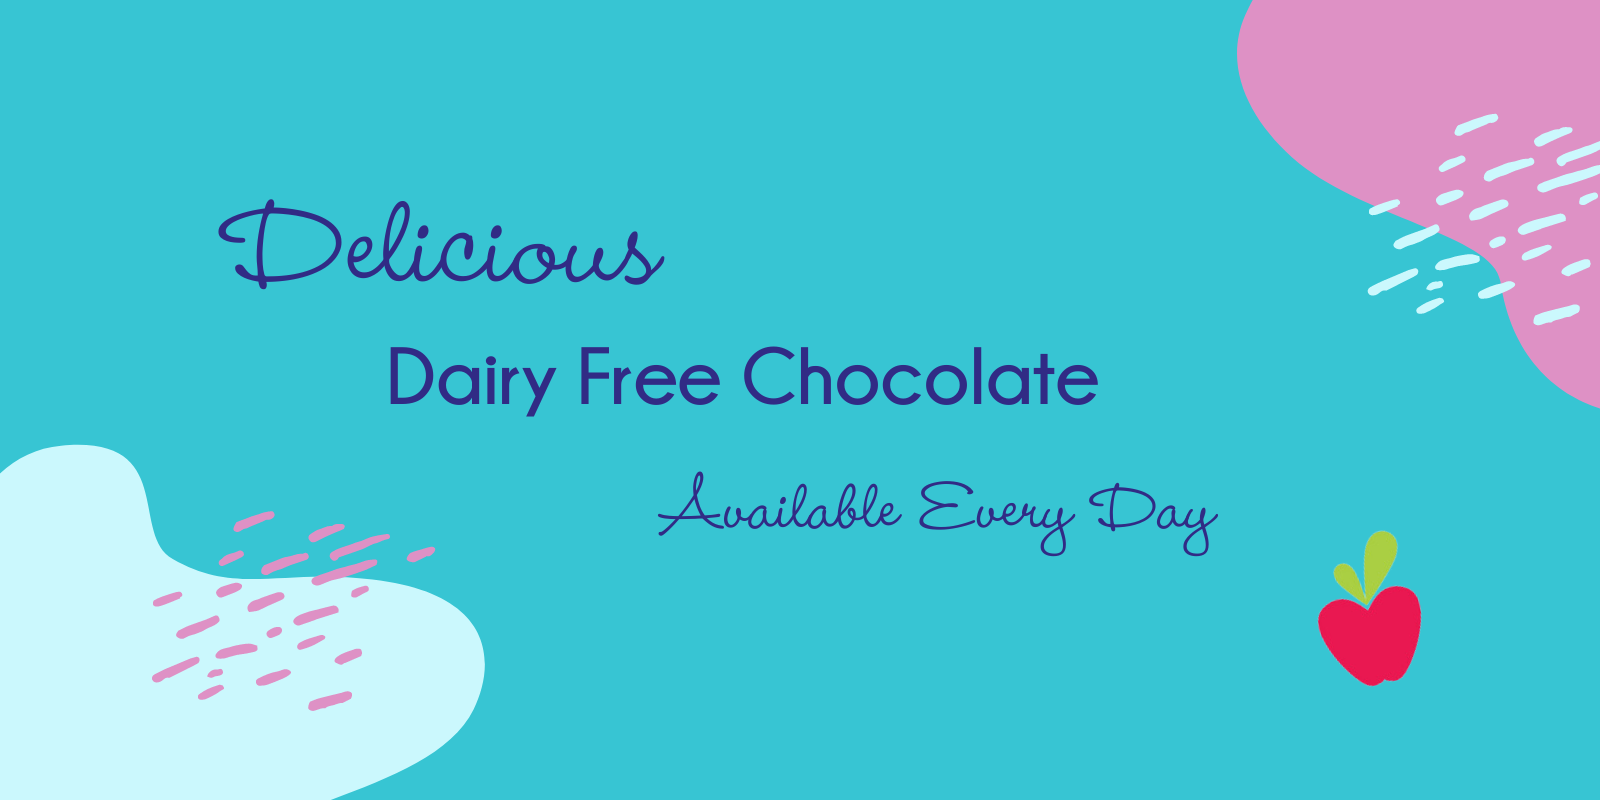 Dairy Free Chocolate Collection Available Every Day